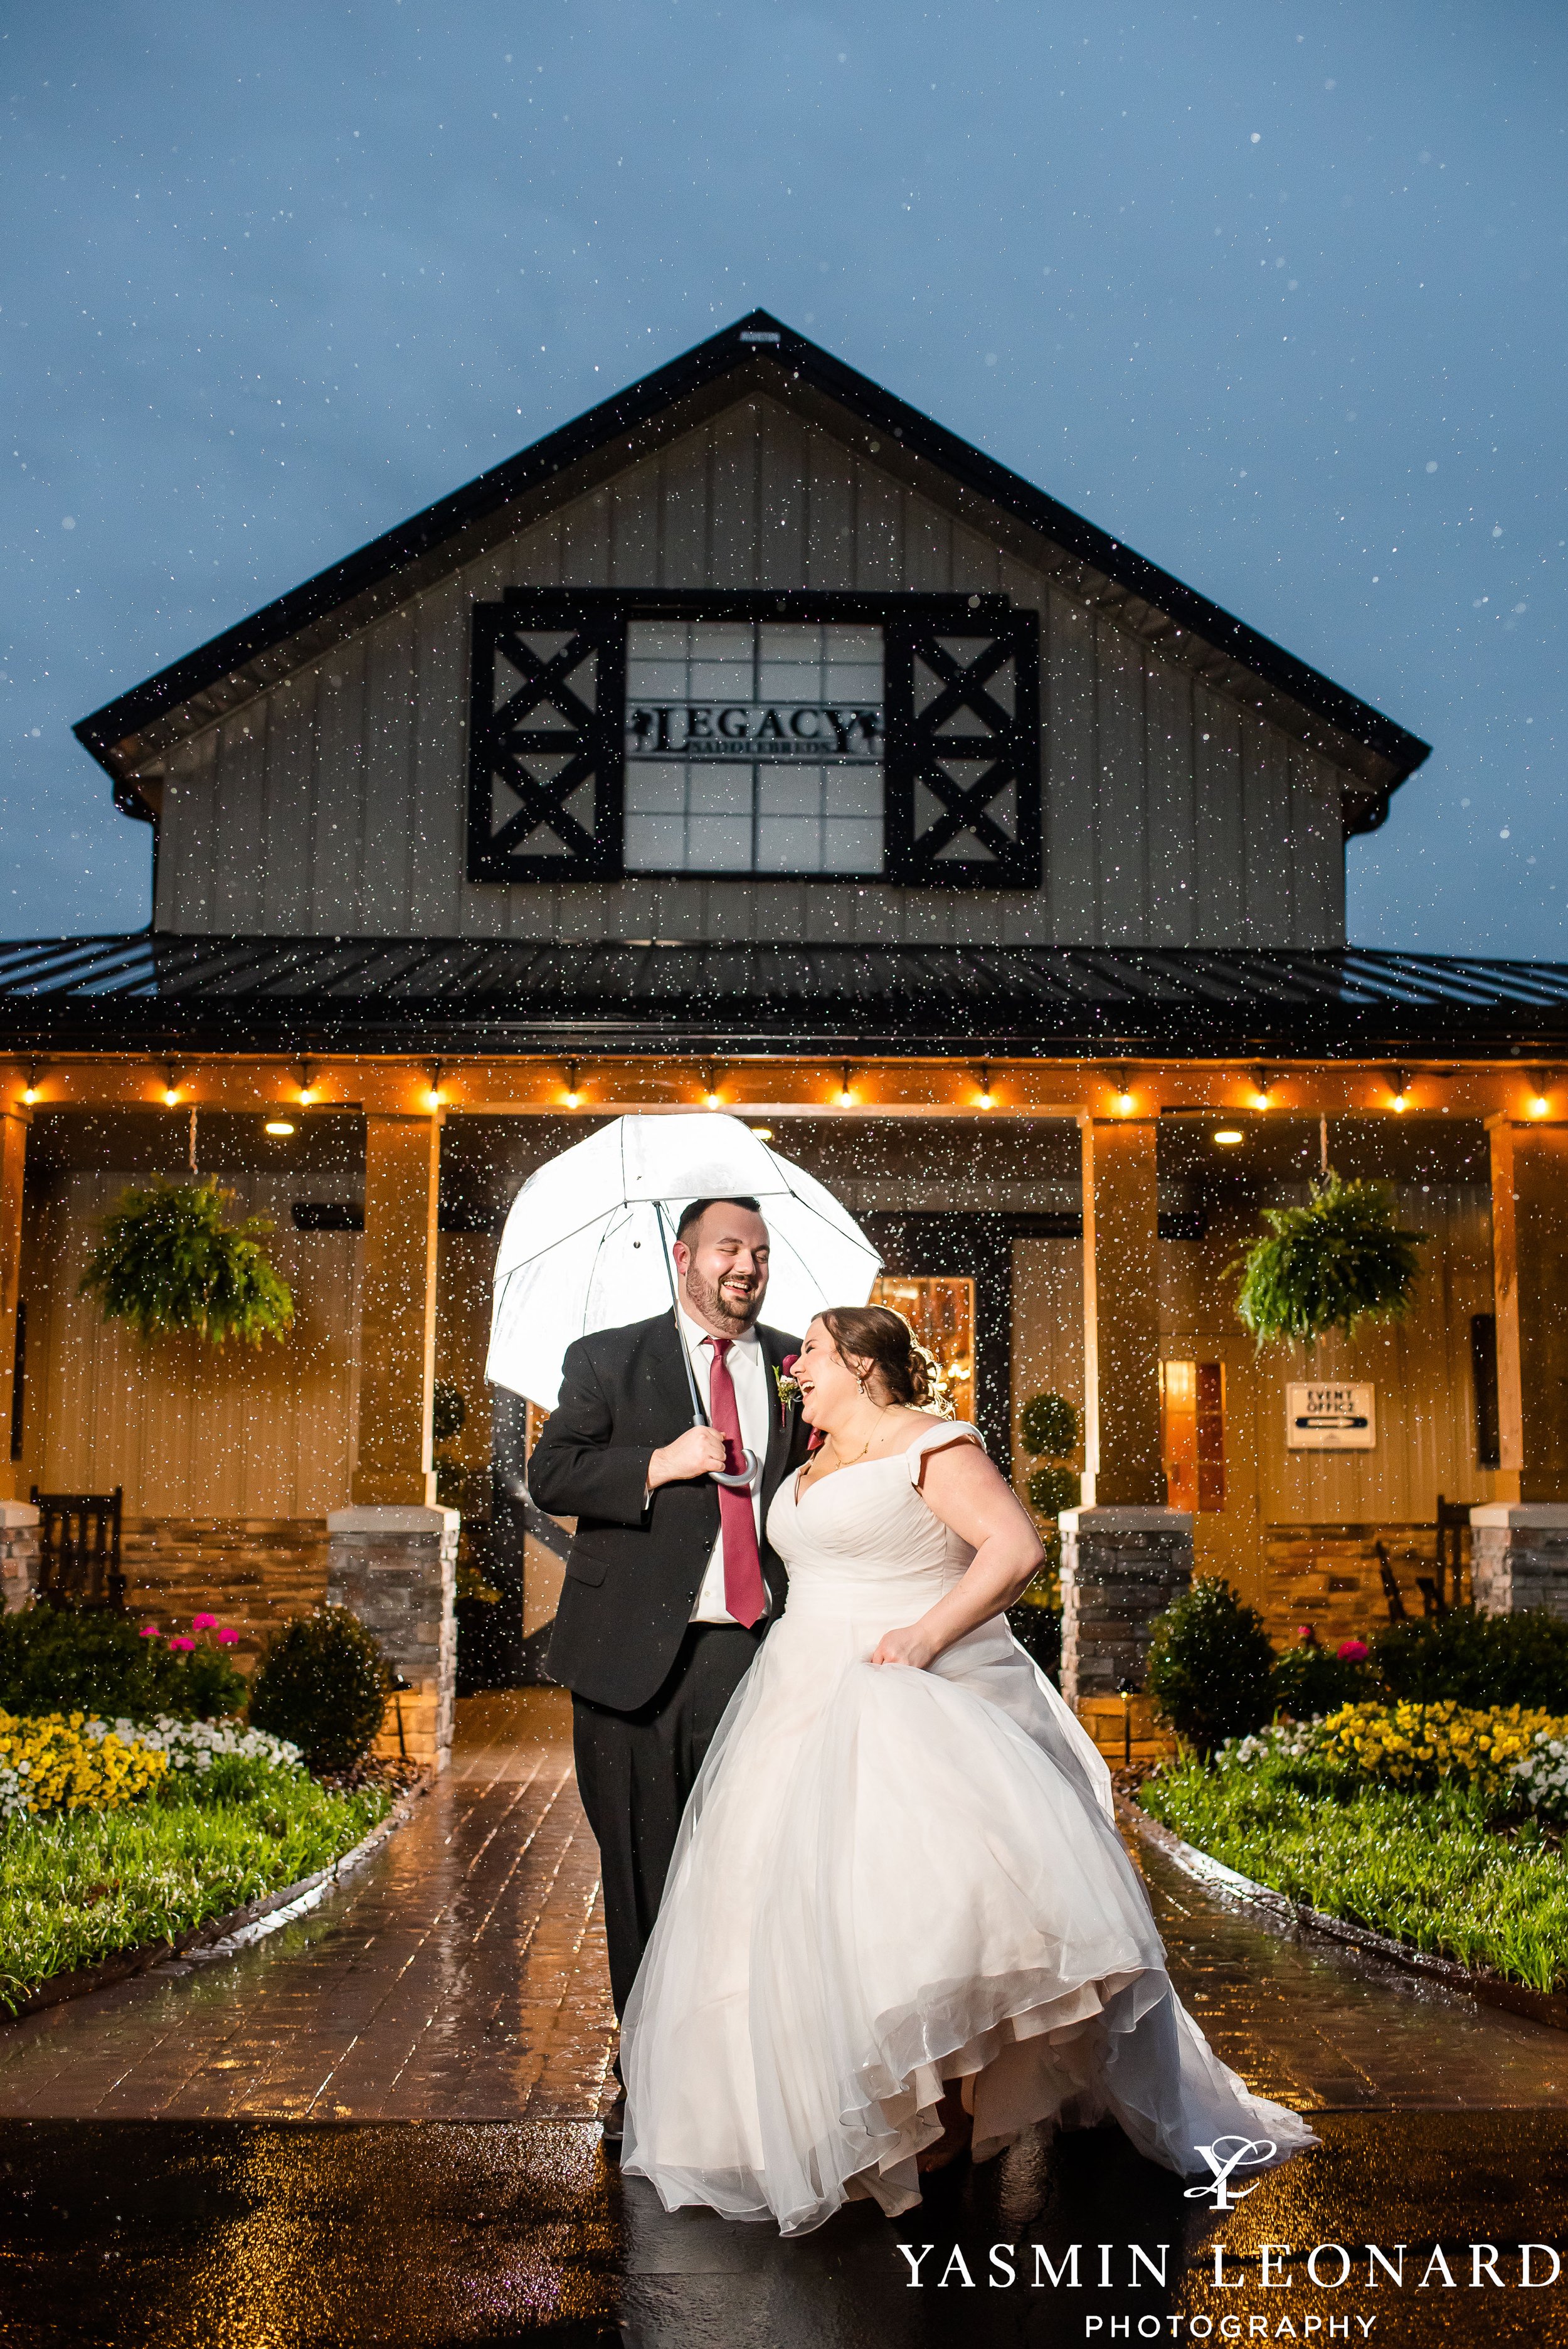 Legacy Stables and Events - Legacy Stables Wedding - Morgan and Logan - NC Weddings - Marry Me NC - Triad Weddings - Best Wedding Photographer Near Me - Best Photographer in High Point - Yasmin Leonard Photography-33.jpg